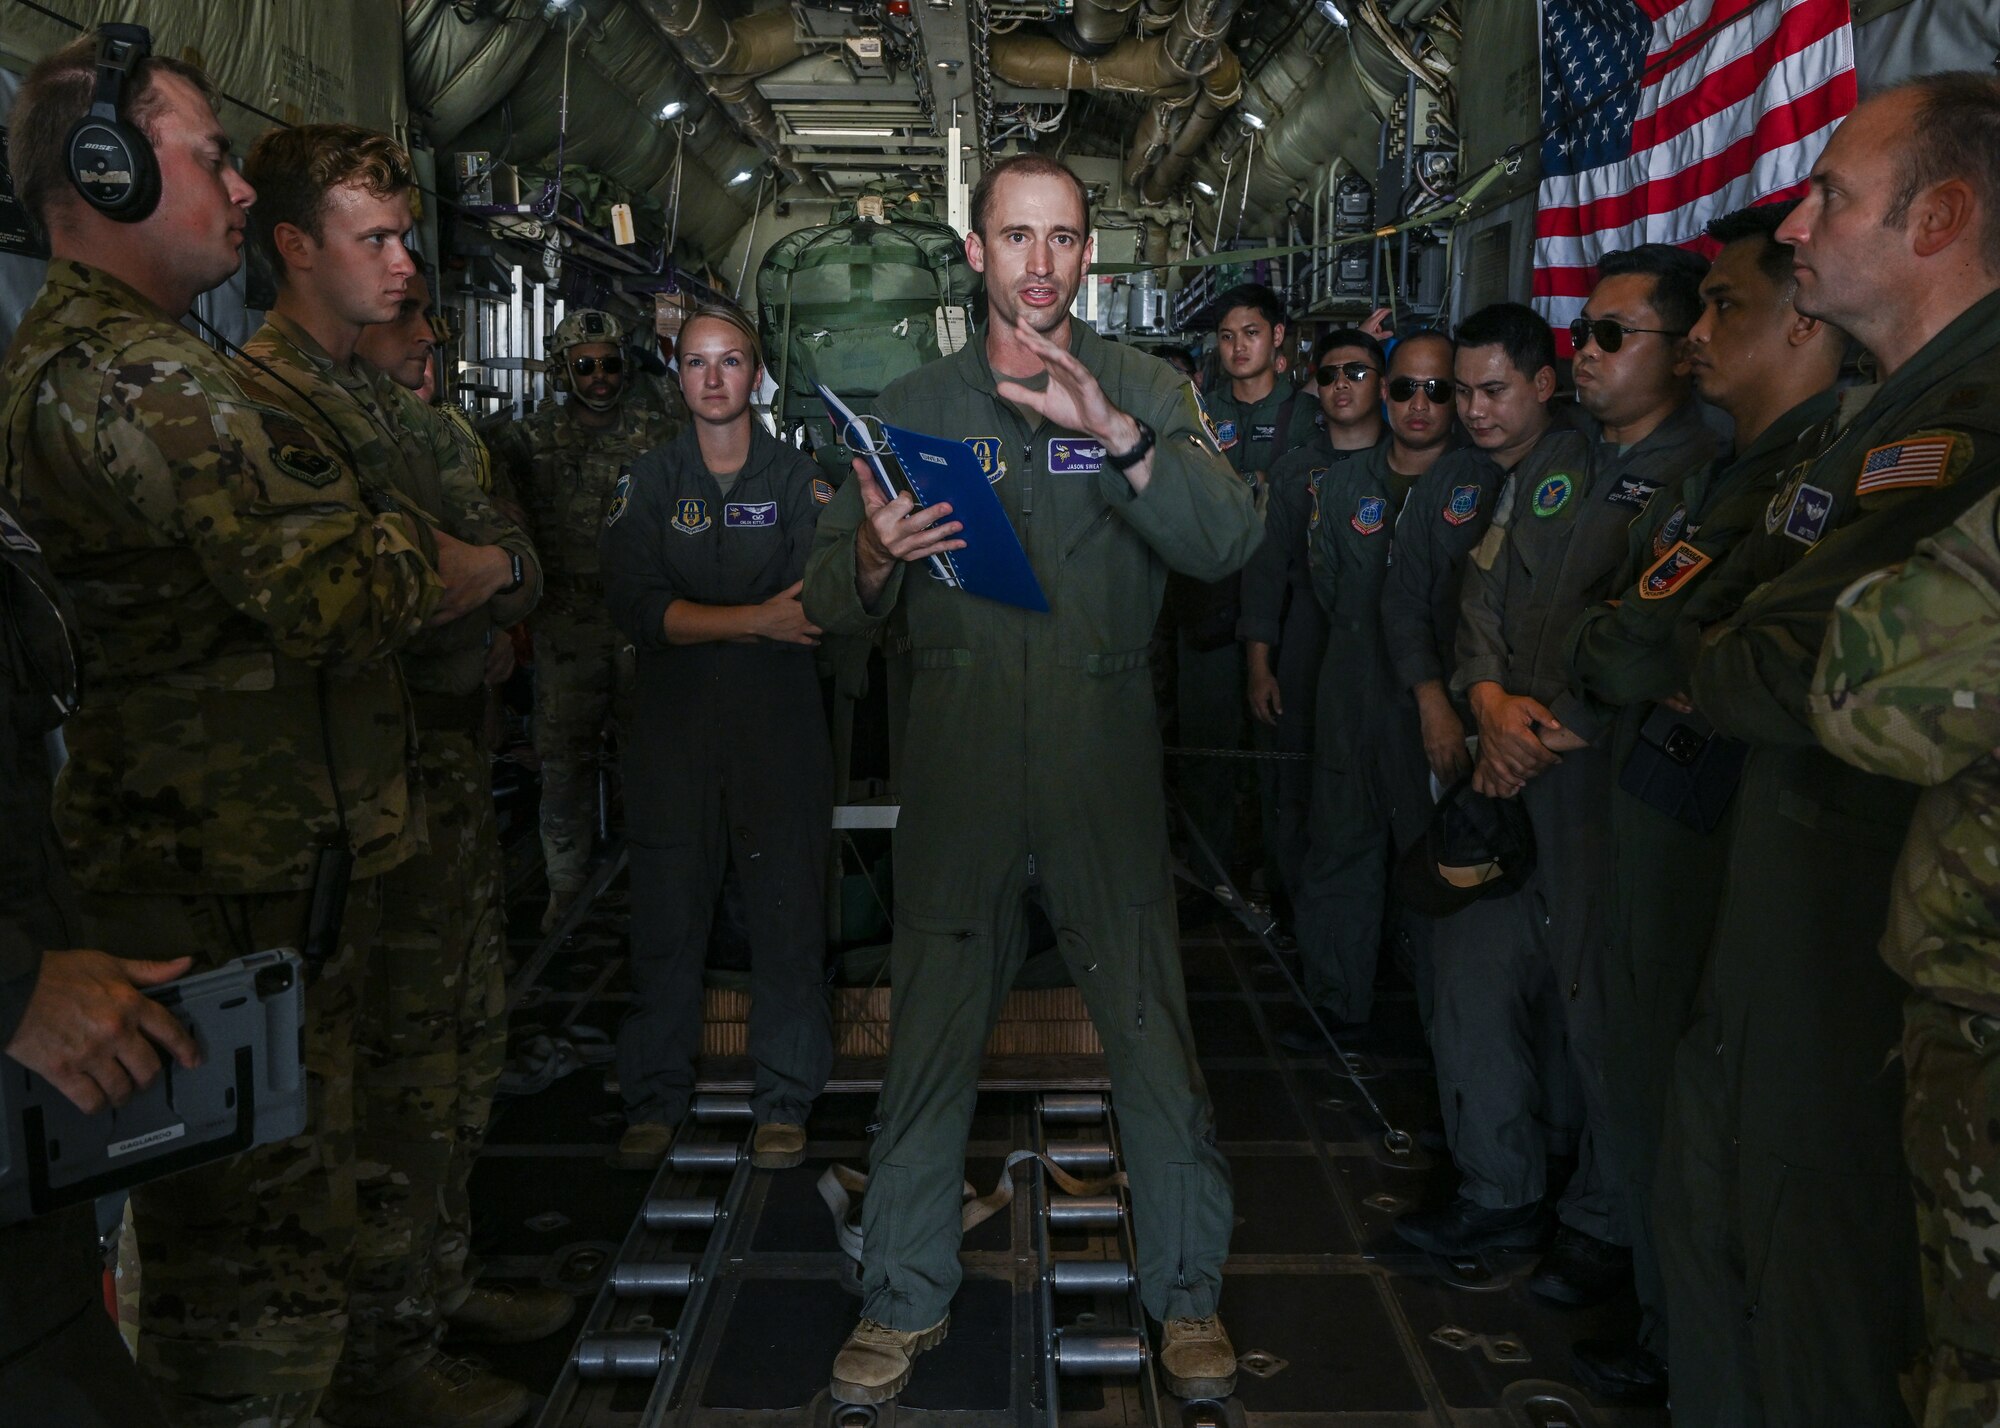 Air Force Reserve pilot briefs others in back of aircraft prior to take-off.